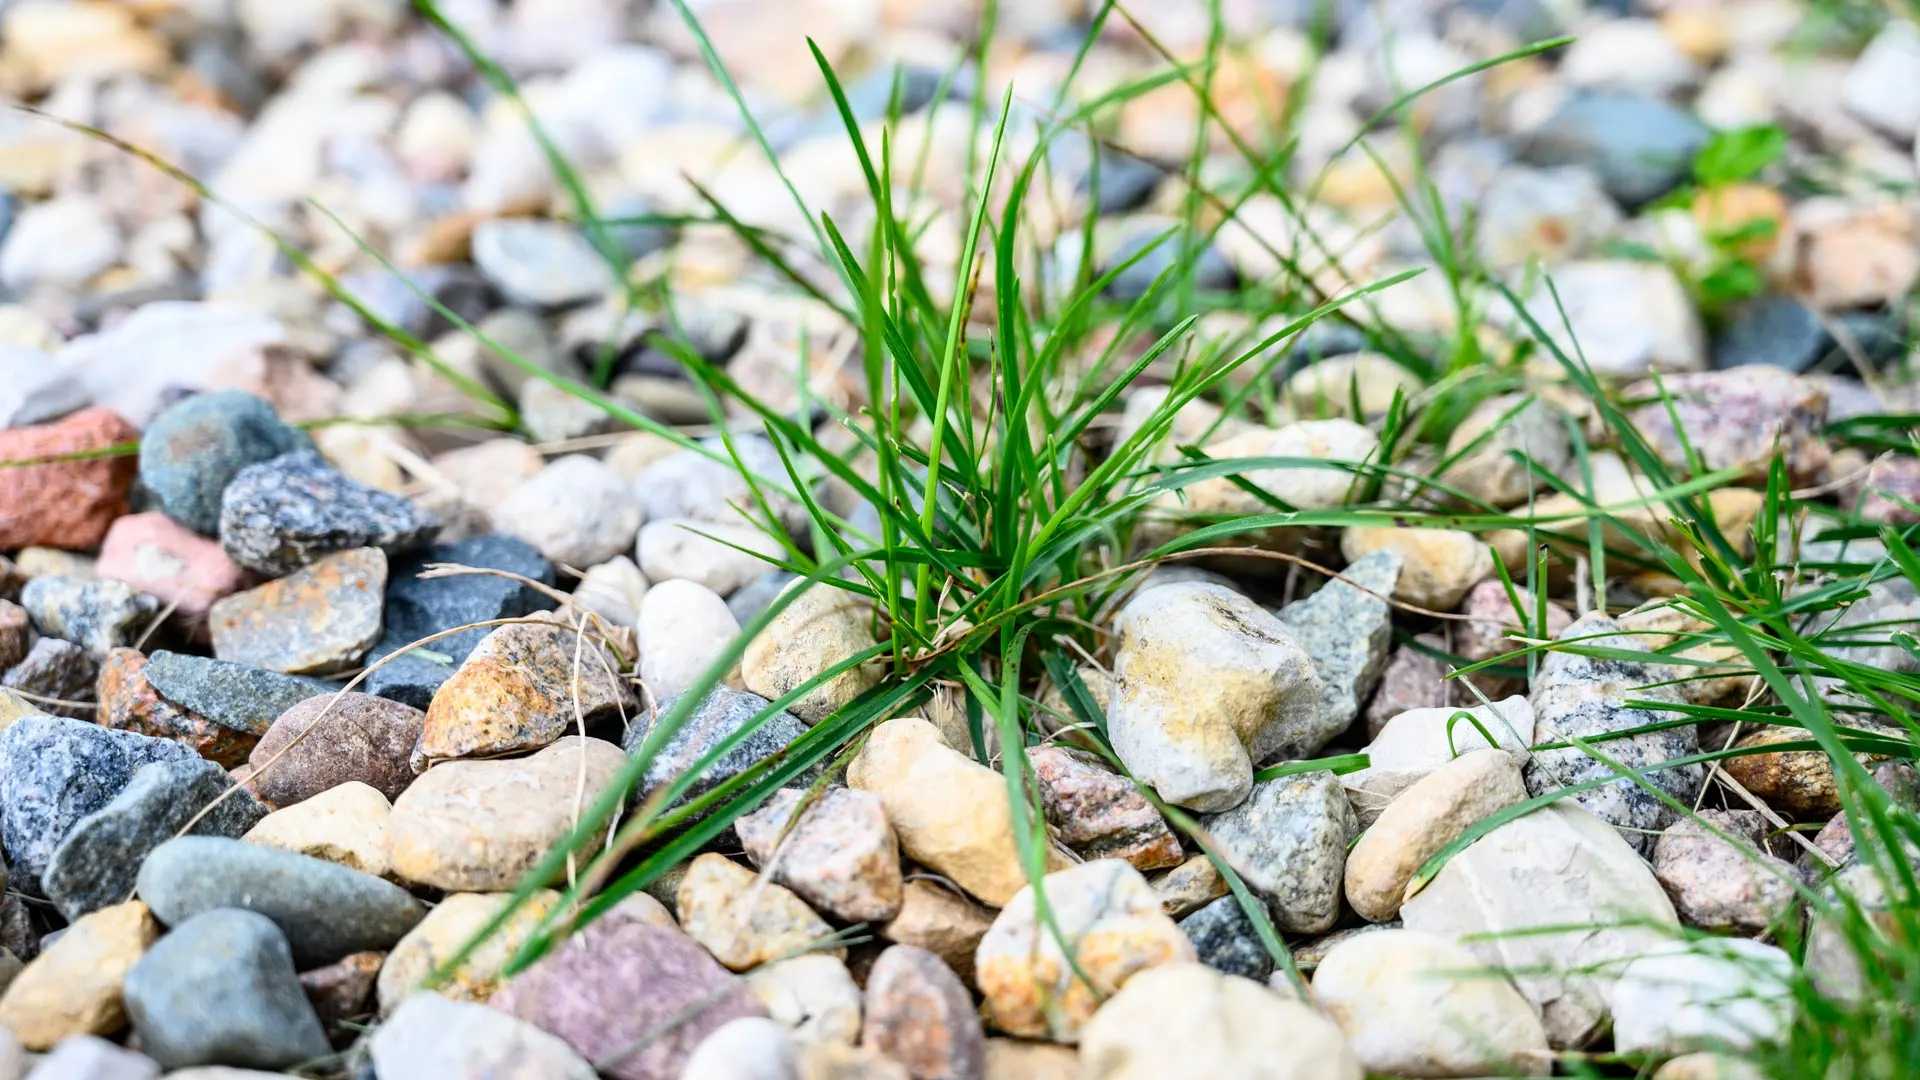 Don’t Let Weeds Linger in Your Landscape Beds - They Should Be Removed ASAP